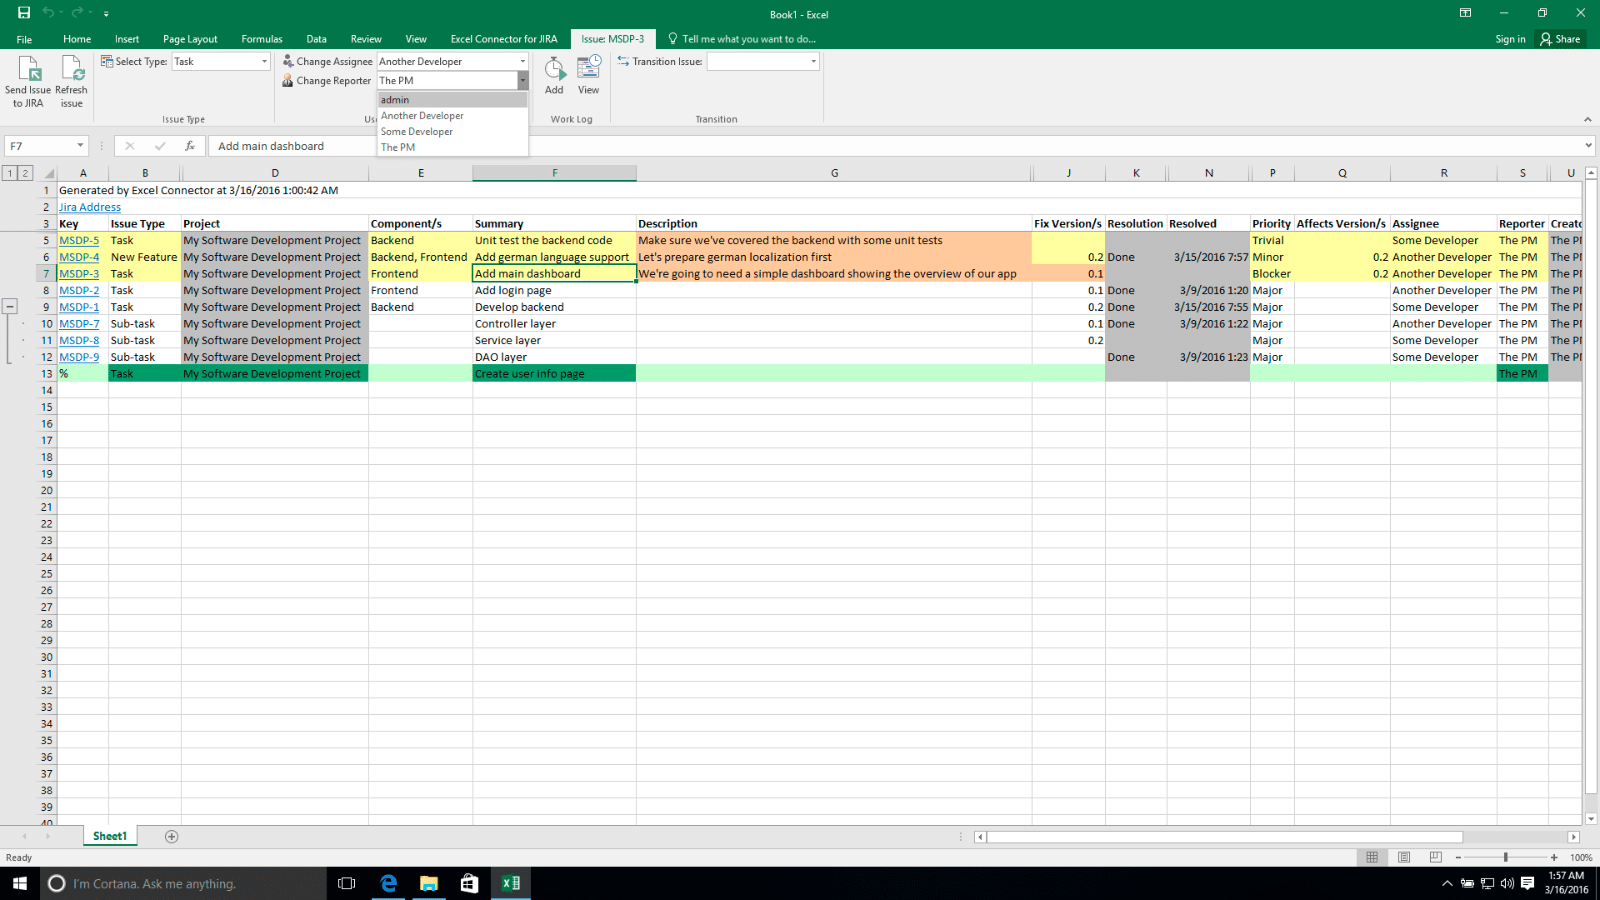 Excel sheet screen view with storing requirements, test cases, and possible defects